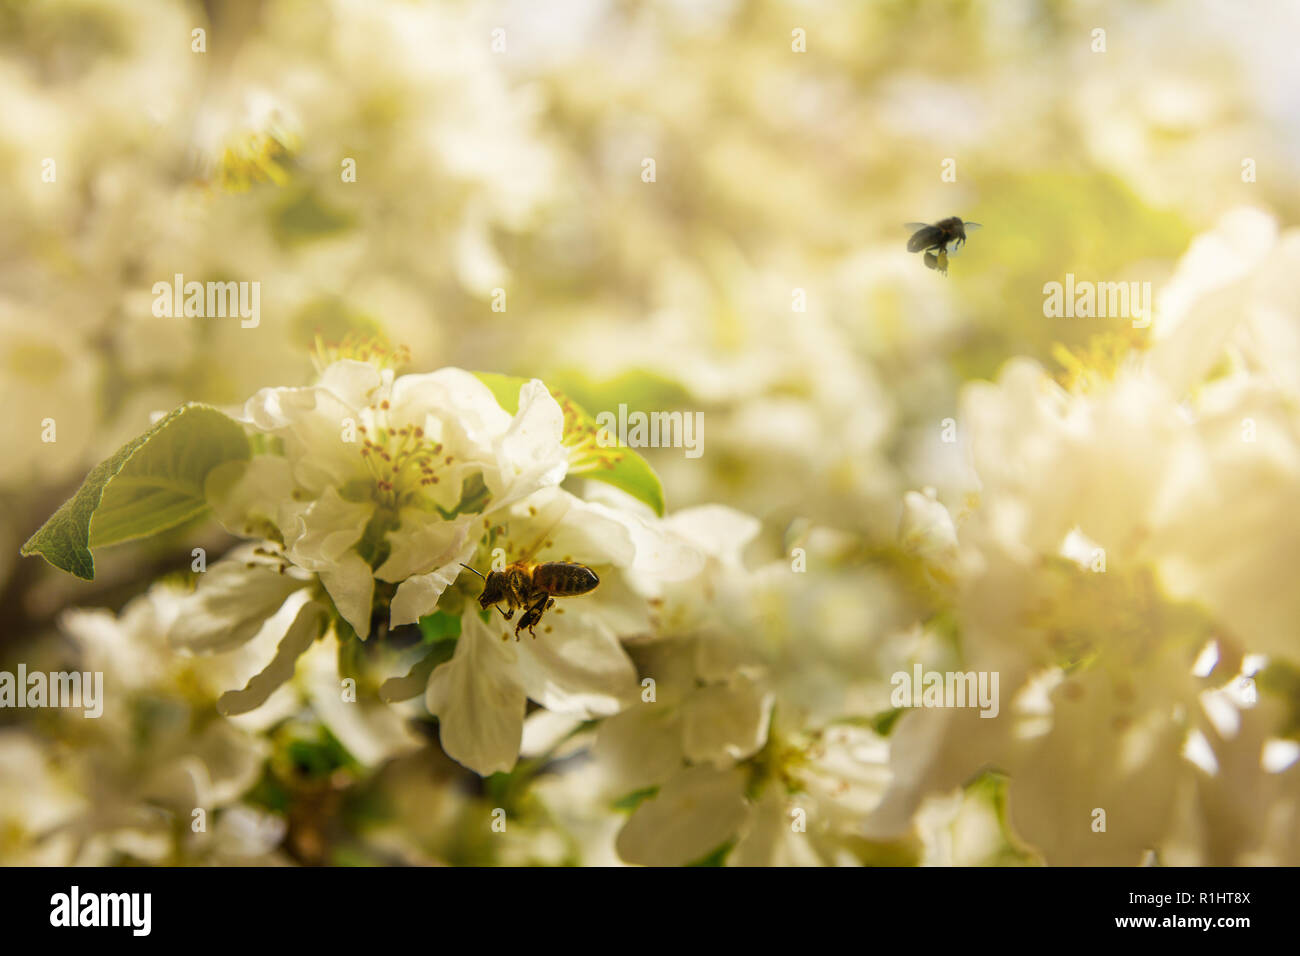 Bees collect pollen from blossoming apple trees on a clear spring day. Stock Photo